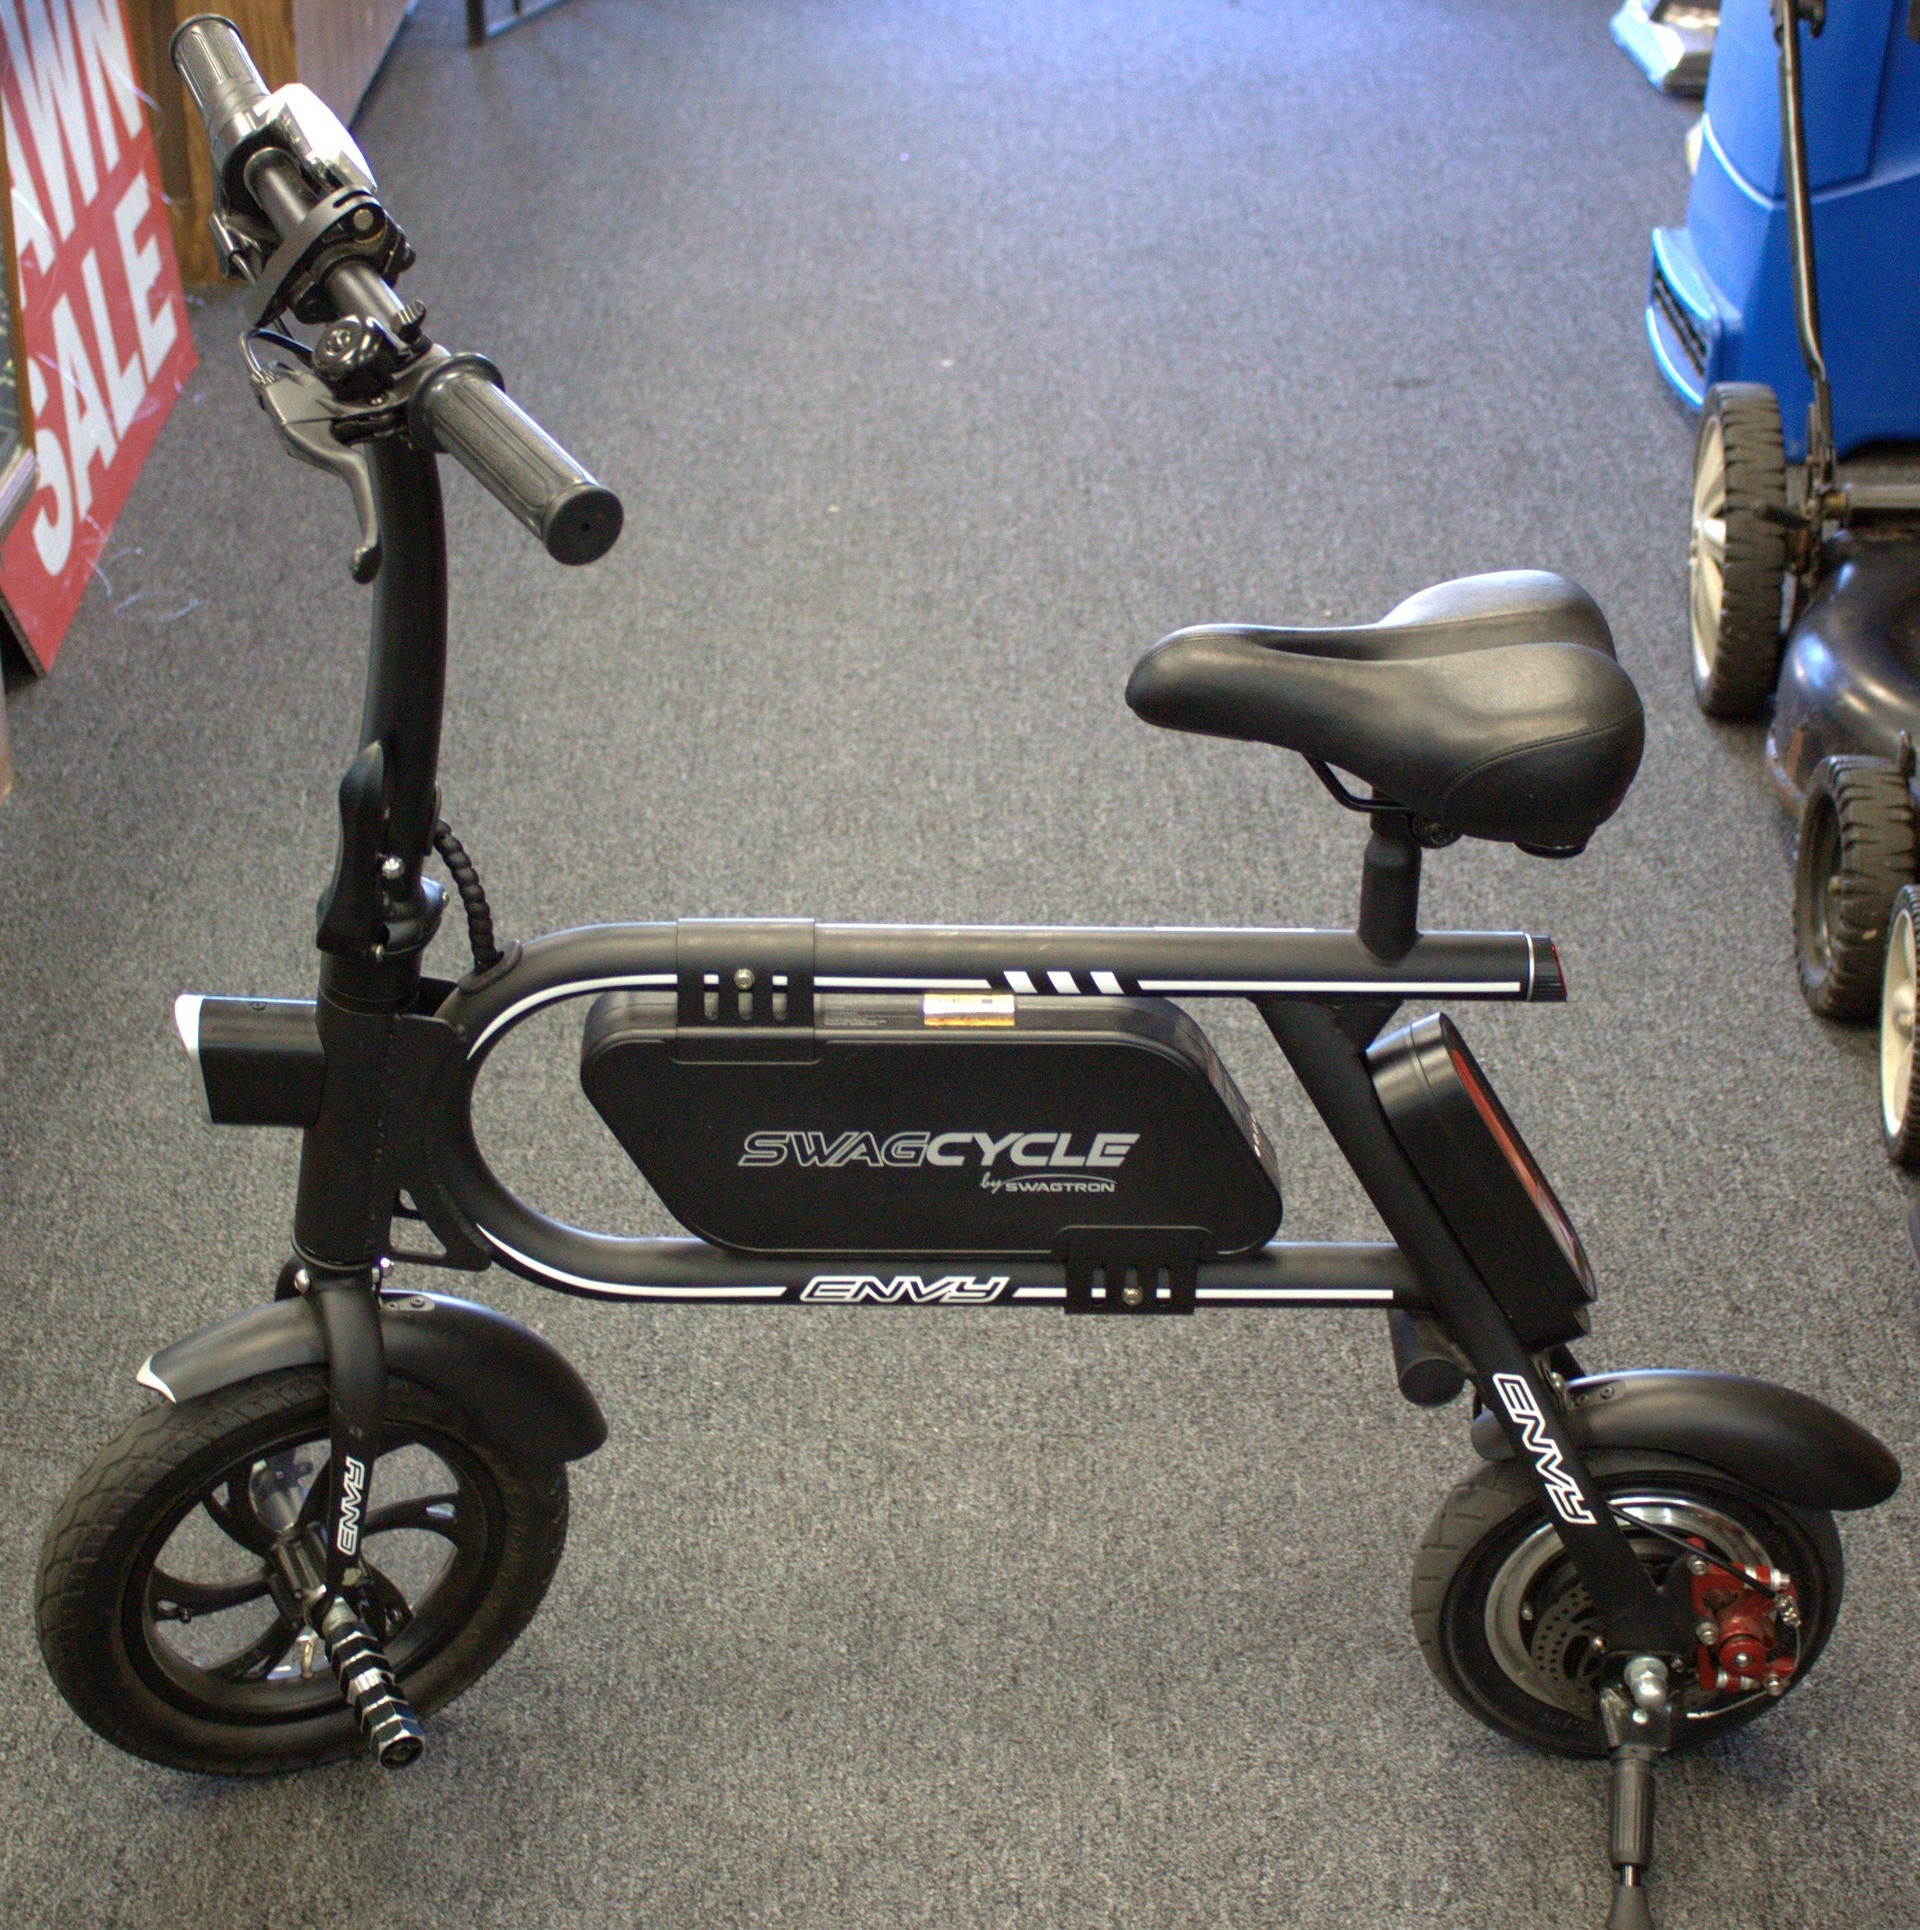 Swagcycle Envy budget eBike standing on kickstand indoors